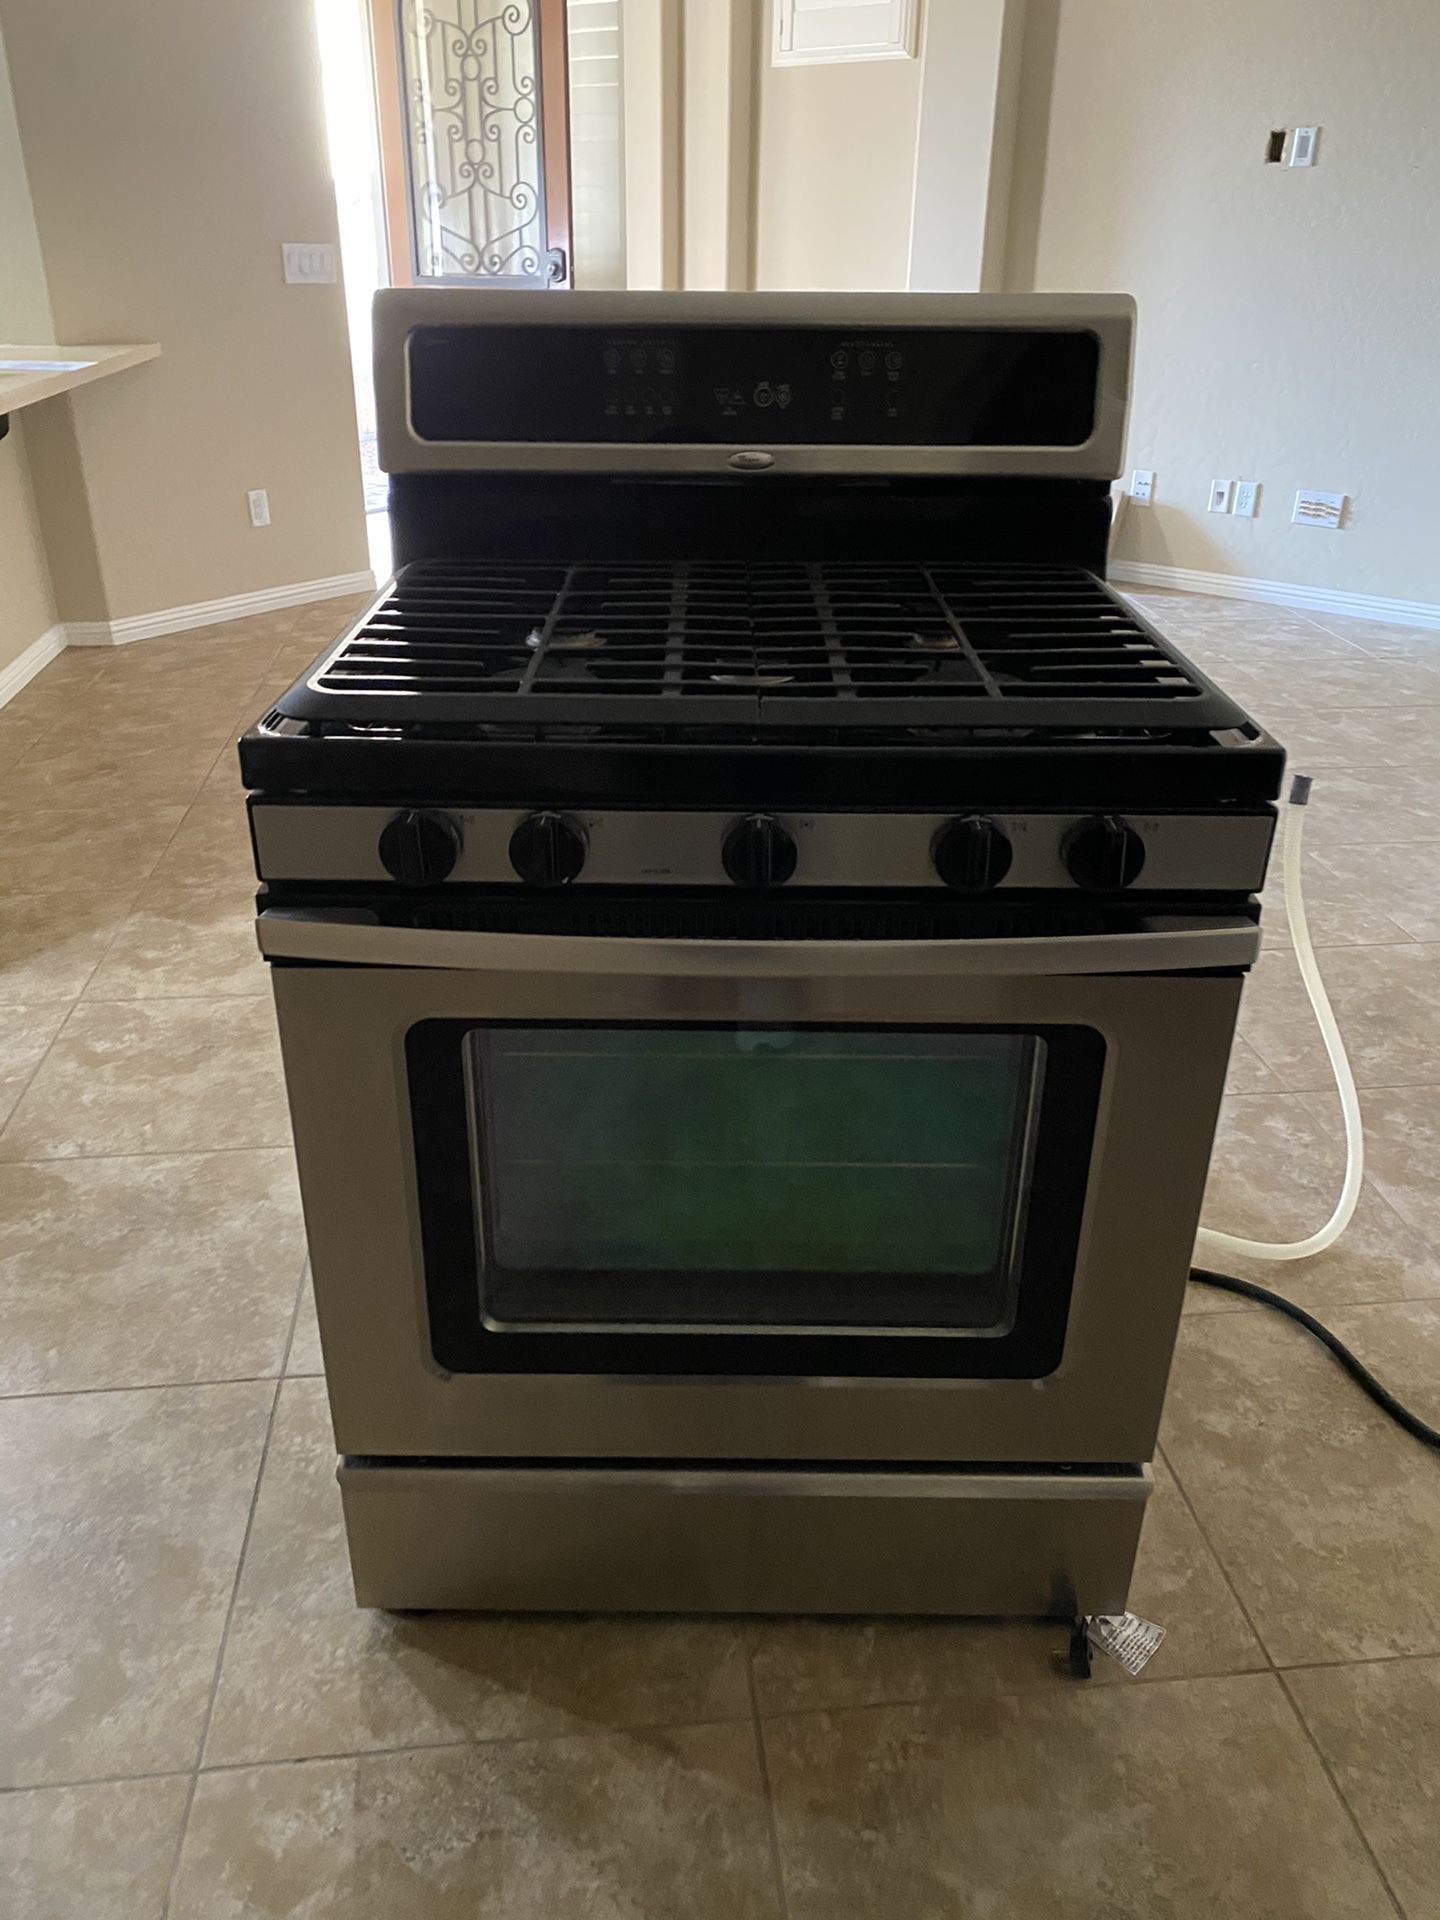 Whirlpool gold series gas stove